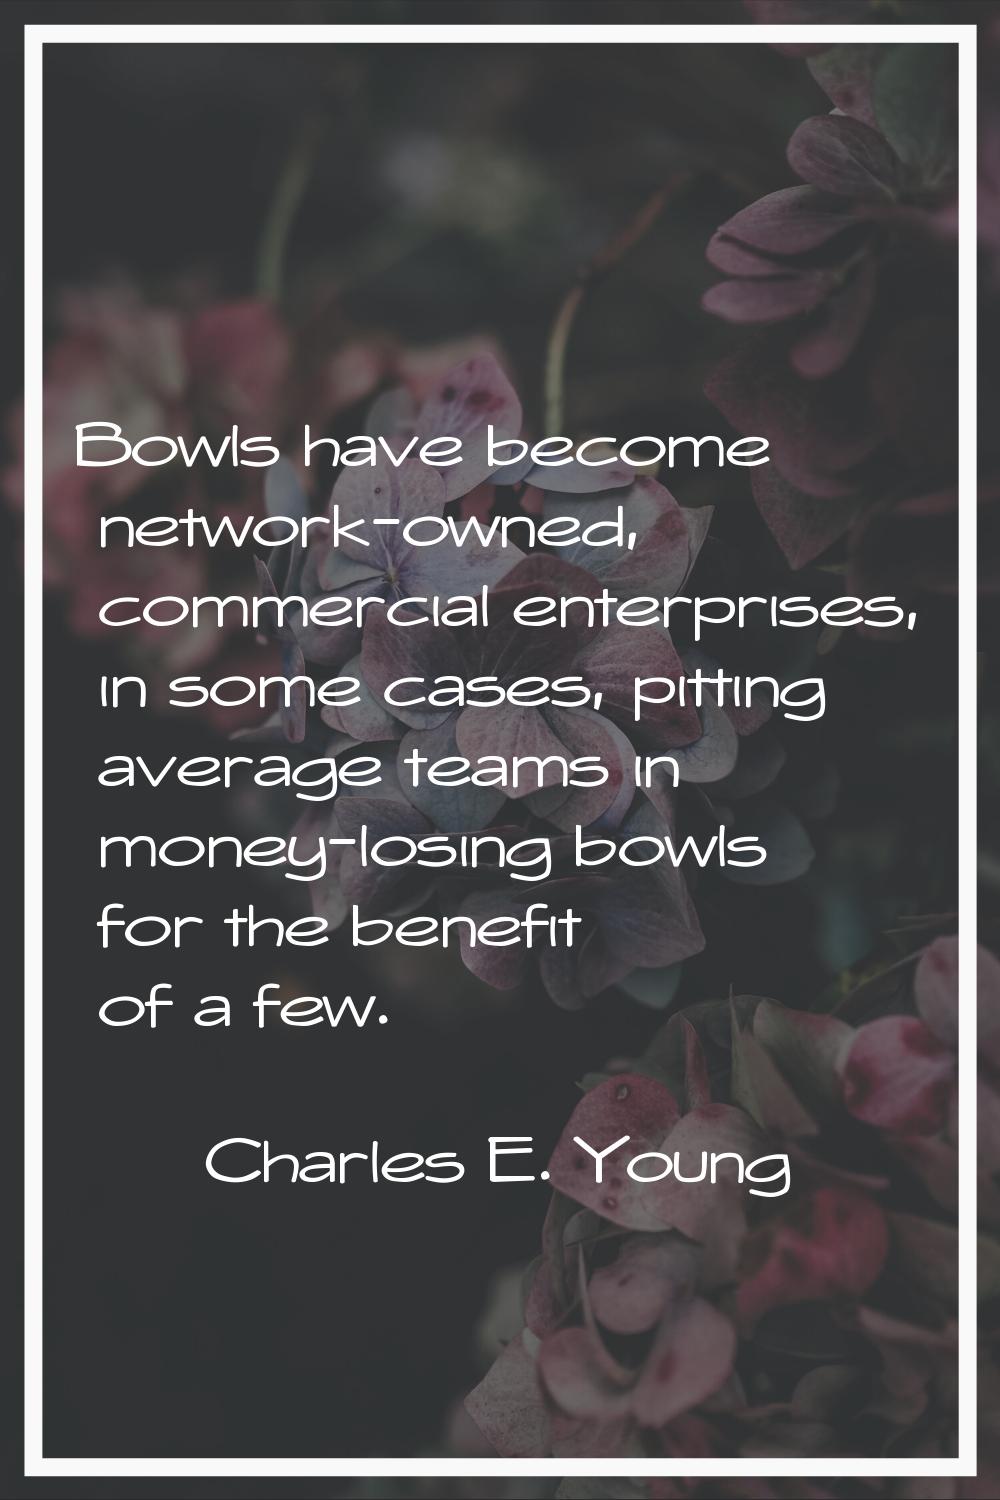 Bowls have become network-owned, commercial enterprises, in some cases, pitting average teams in mo